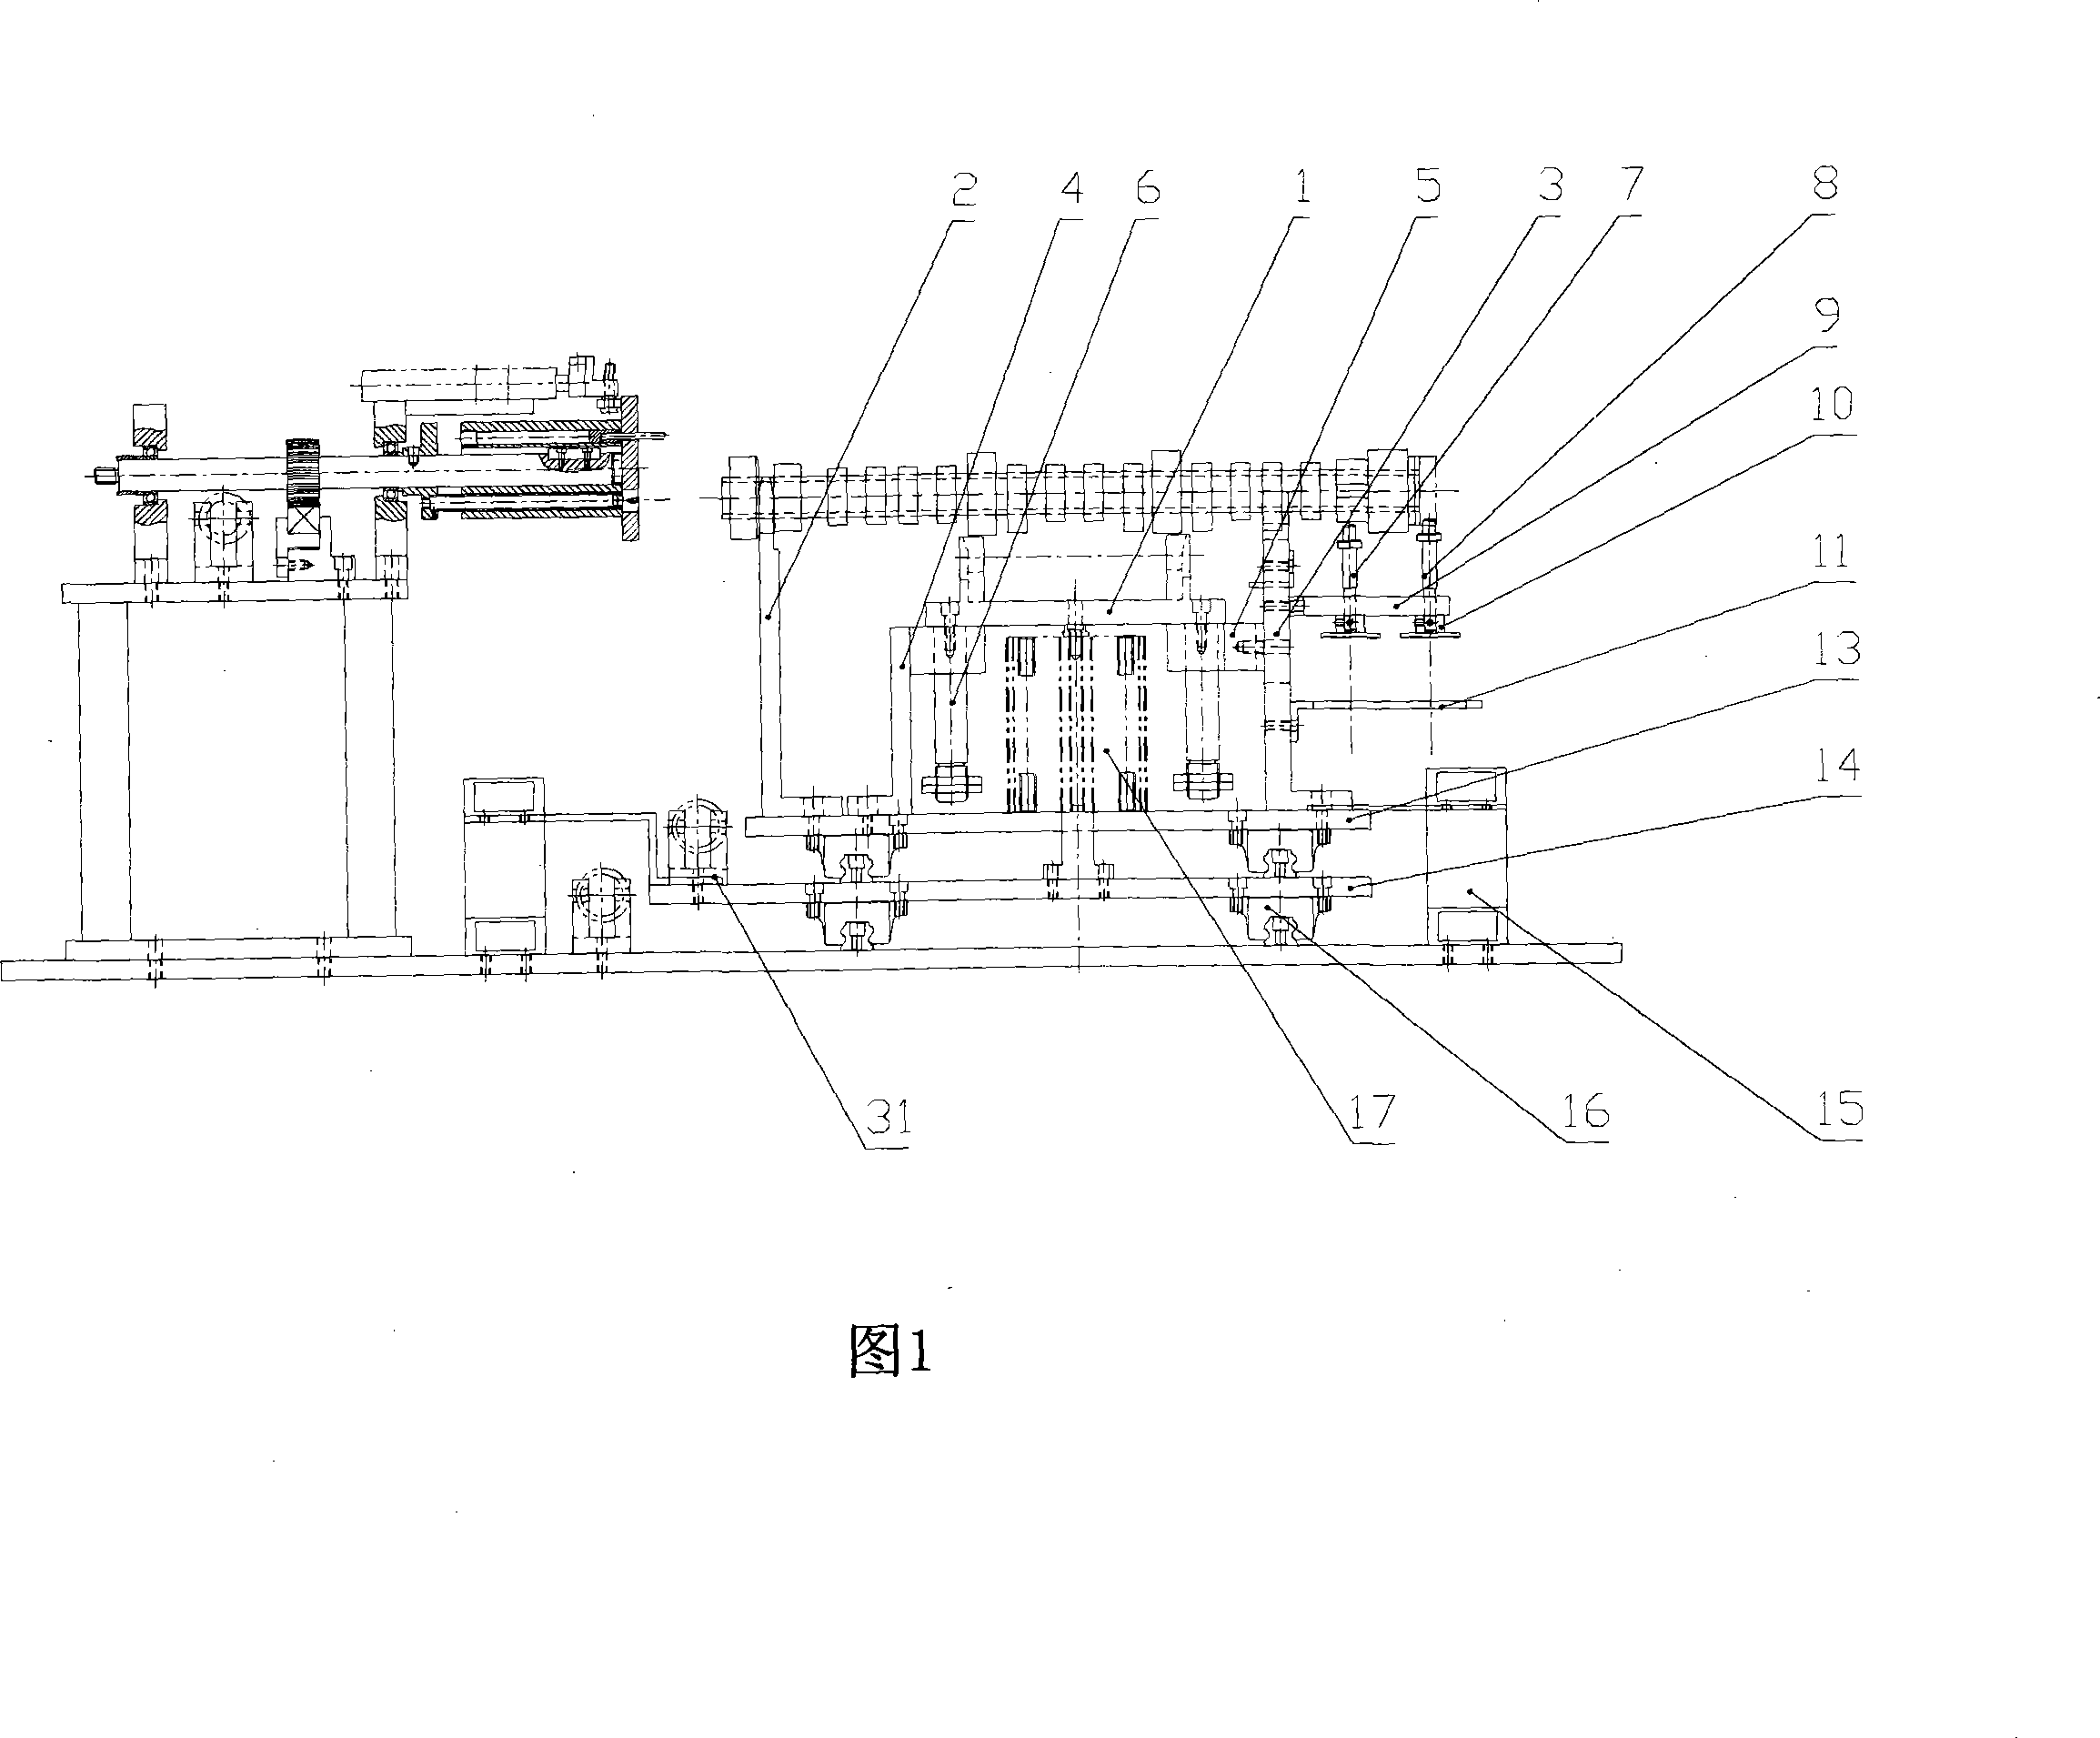 Camshaft fixture cramp and its automatically printing method